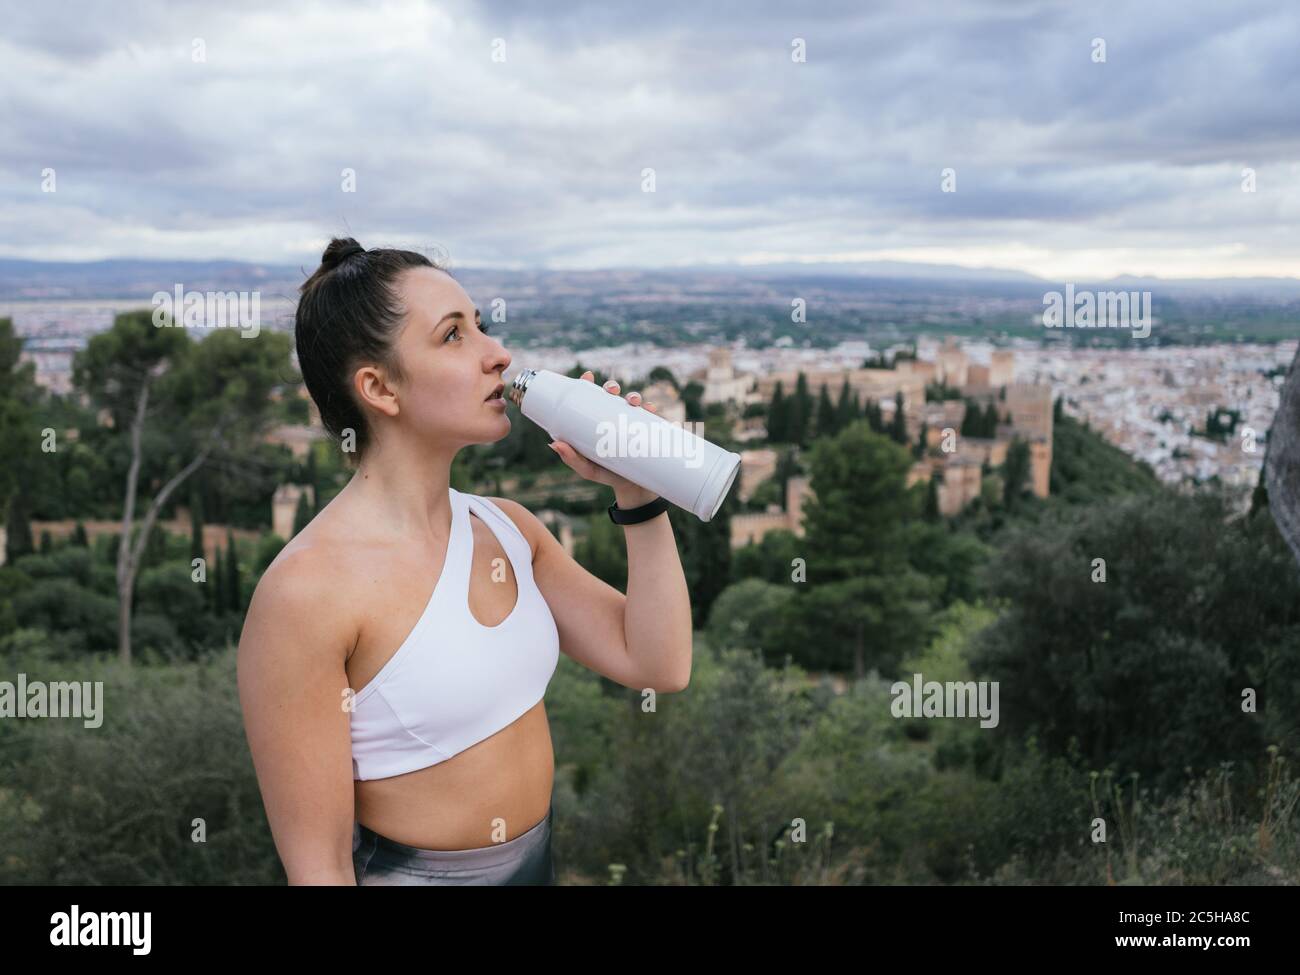 Fit pretty woman drinking water from a reusable bottle after training above the city with the Alhambra in the background at sunset in summer. Stock Photo